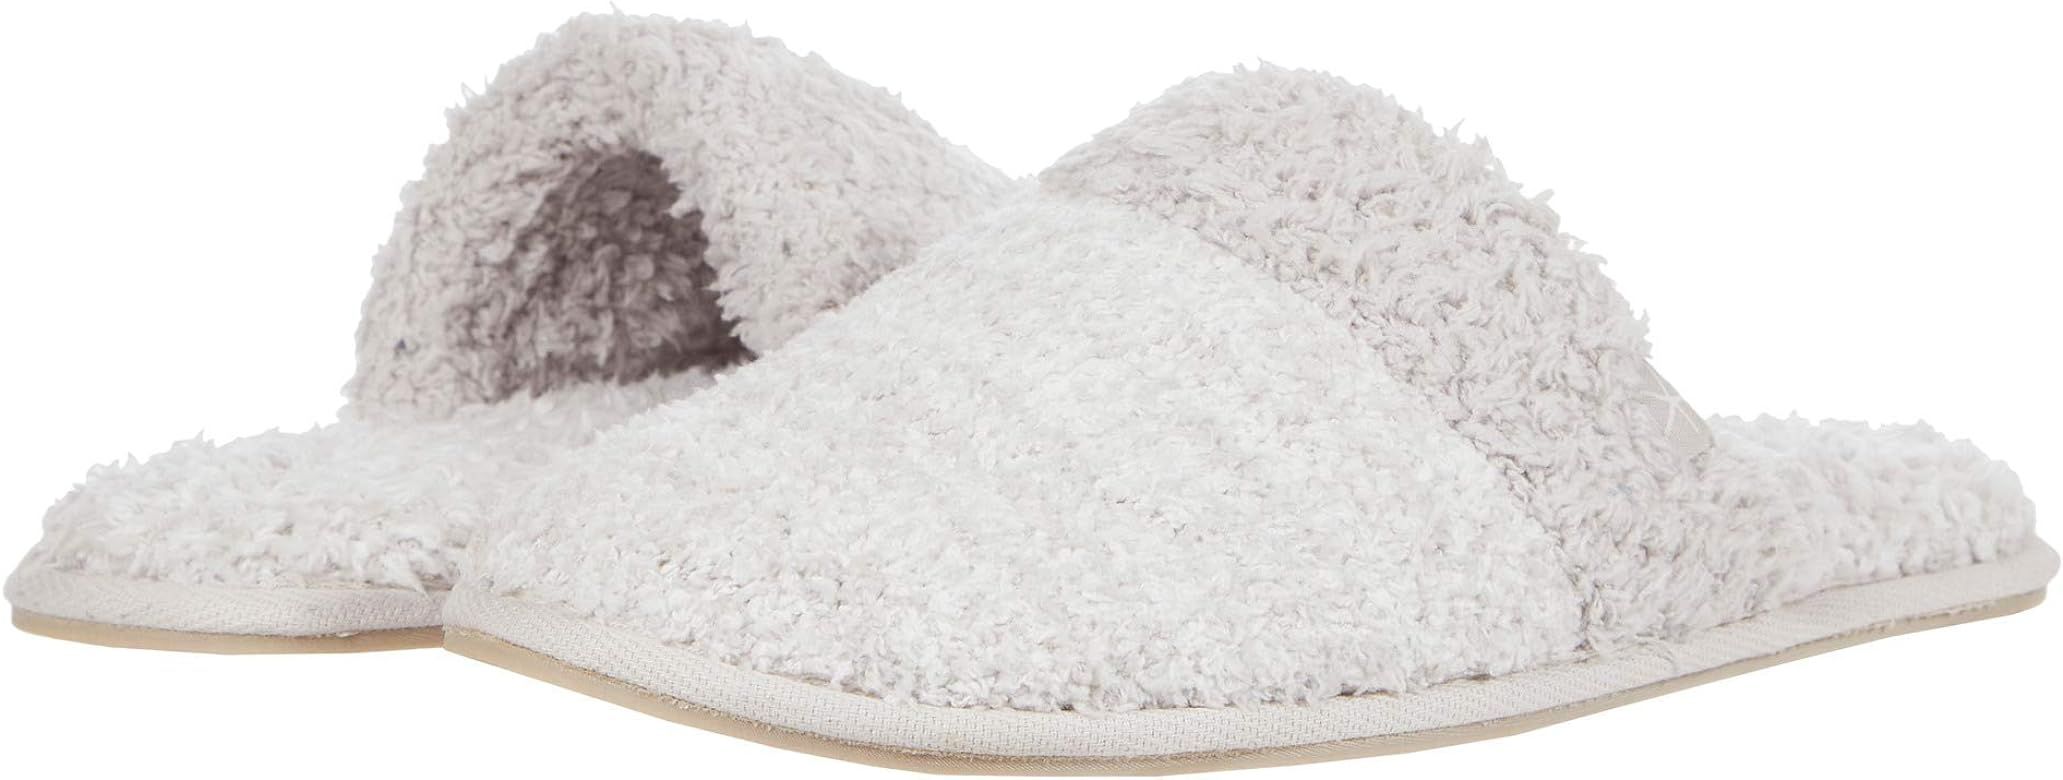 Barefoot Dreams CozyChic Malibu Cozy Slippers for Women, Comfy House Slippers | Amazon (US)